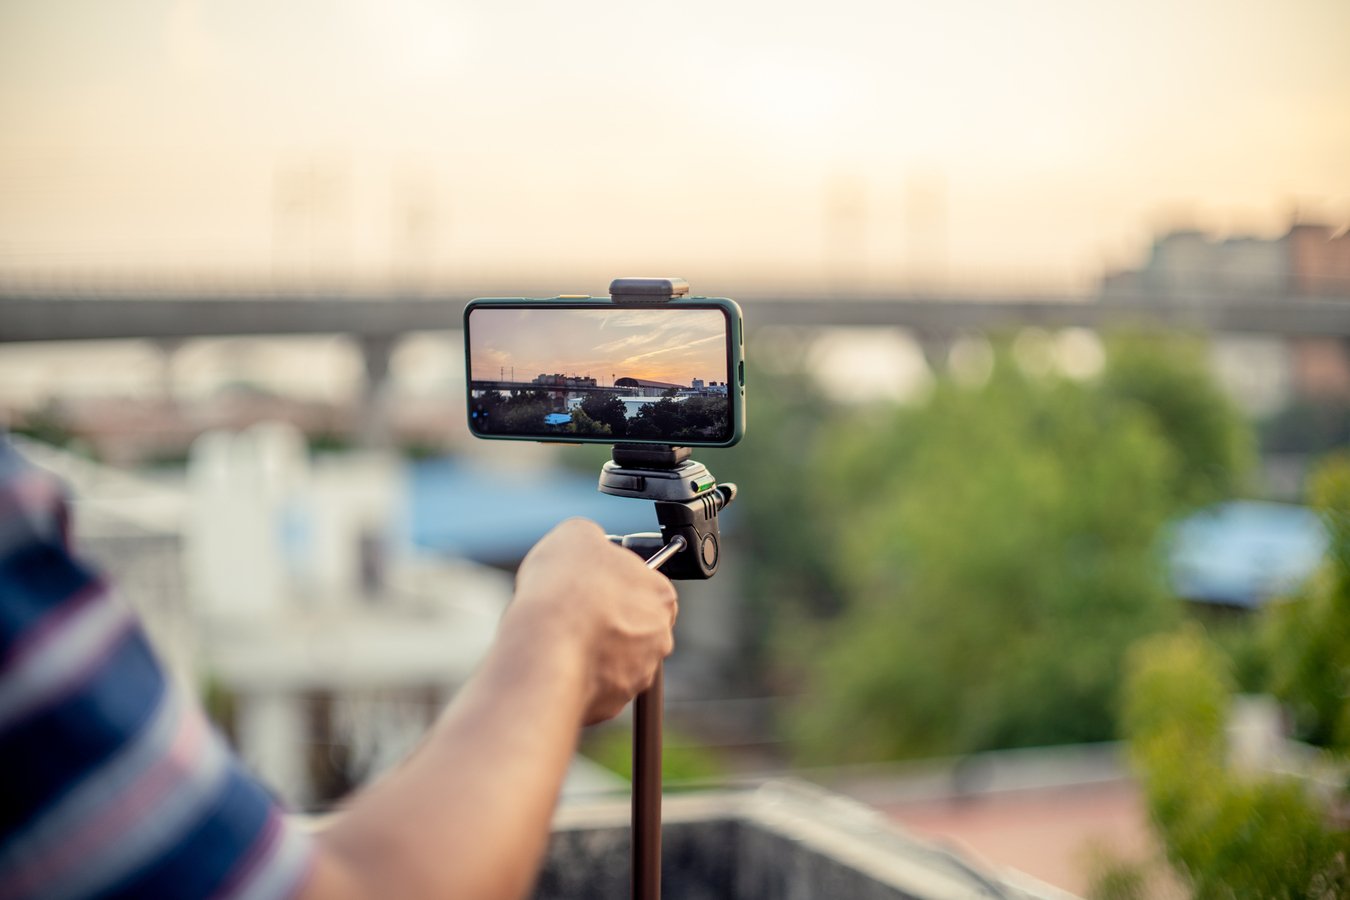 mobile phone mounted on a tripod at full extention replacing a DSLR for a professional shoot to capture a sunset with a metro station and train arriving as seen on the screen with rest out of focus. Shows the rapid advancement of technology that allows people to use their mobile phones for professional things like vlogging, timelapse, hyperlapse, youtube and tiktok videos